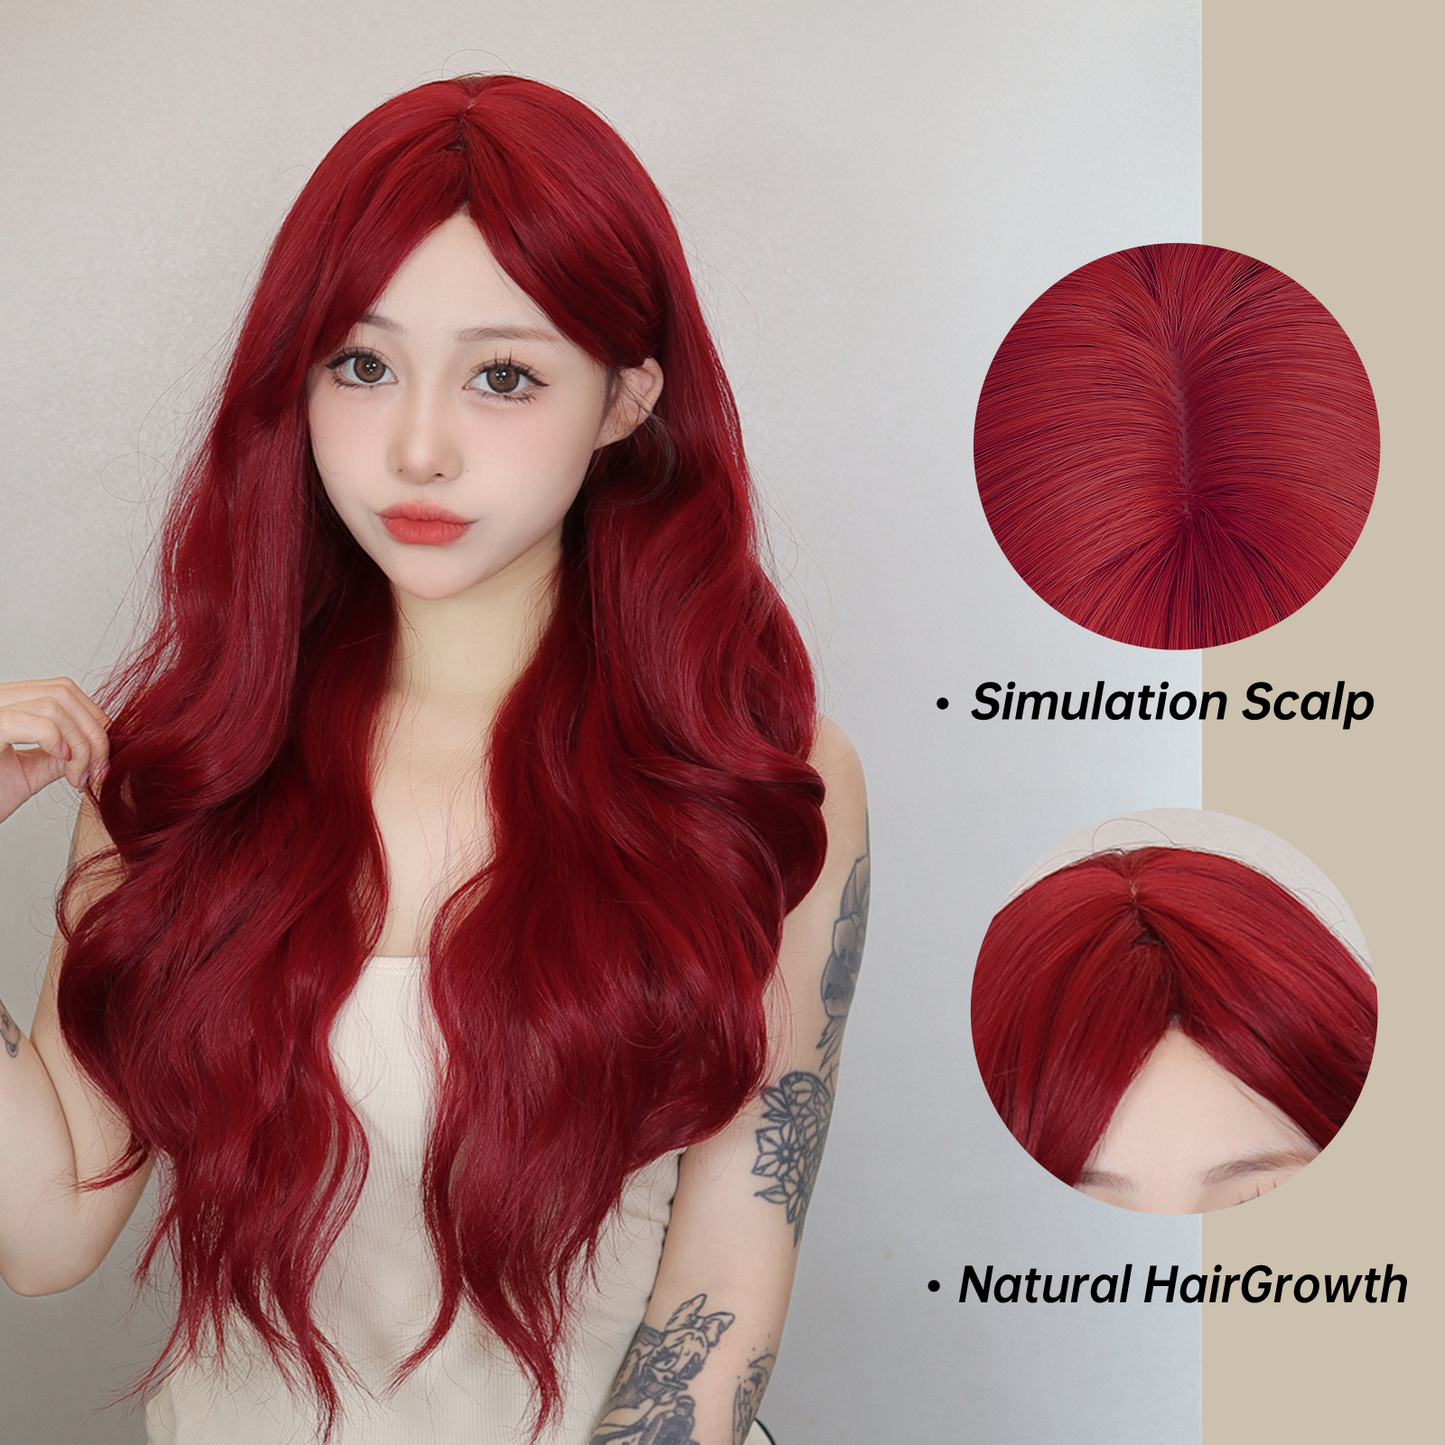 【TBianca】Loxology | 26 Inches Long Curly Wine Red Wigs with Bangs Synthetic Wigs